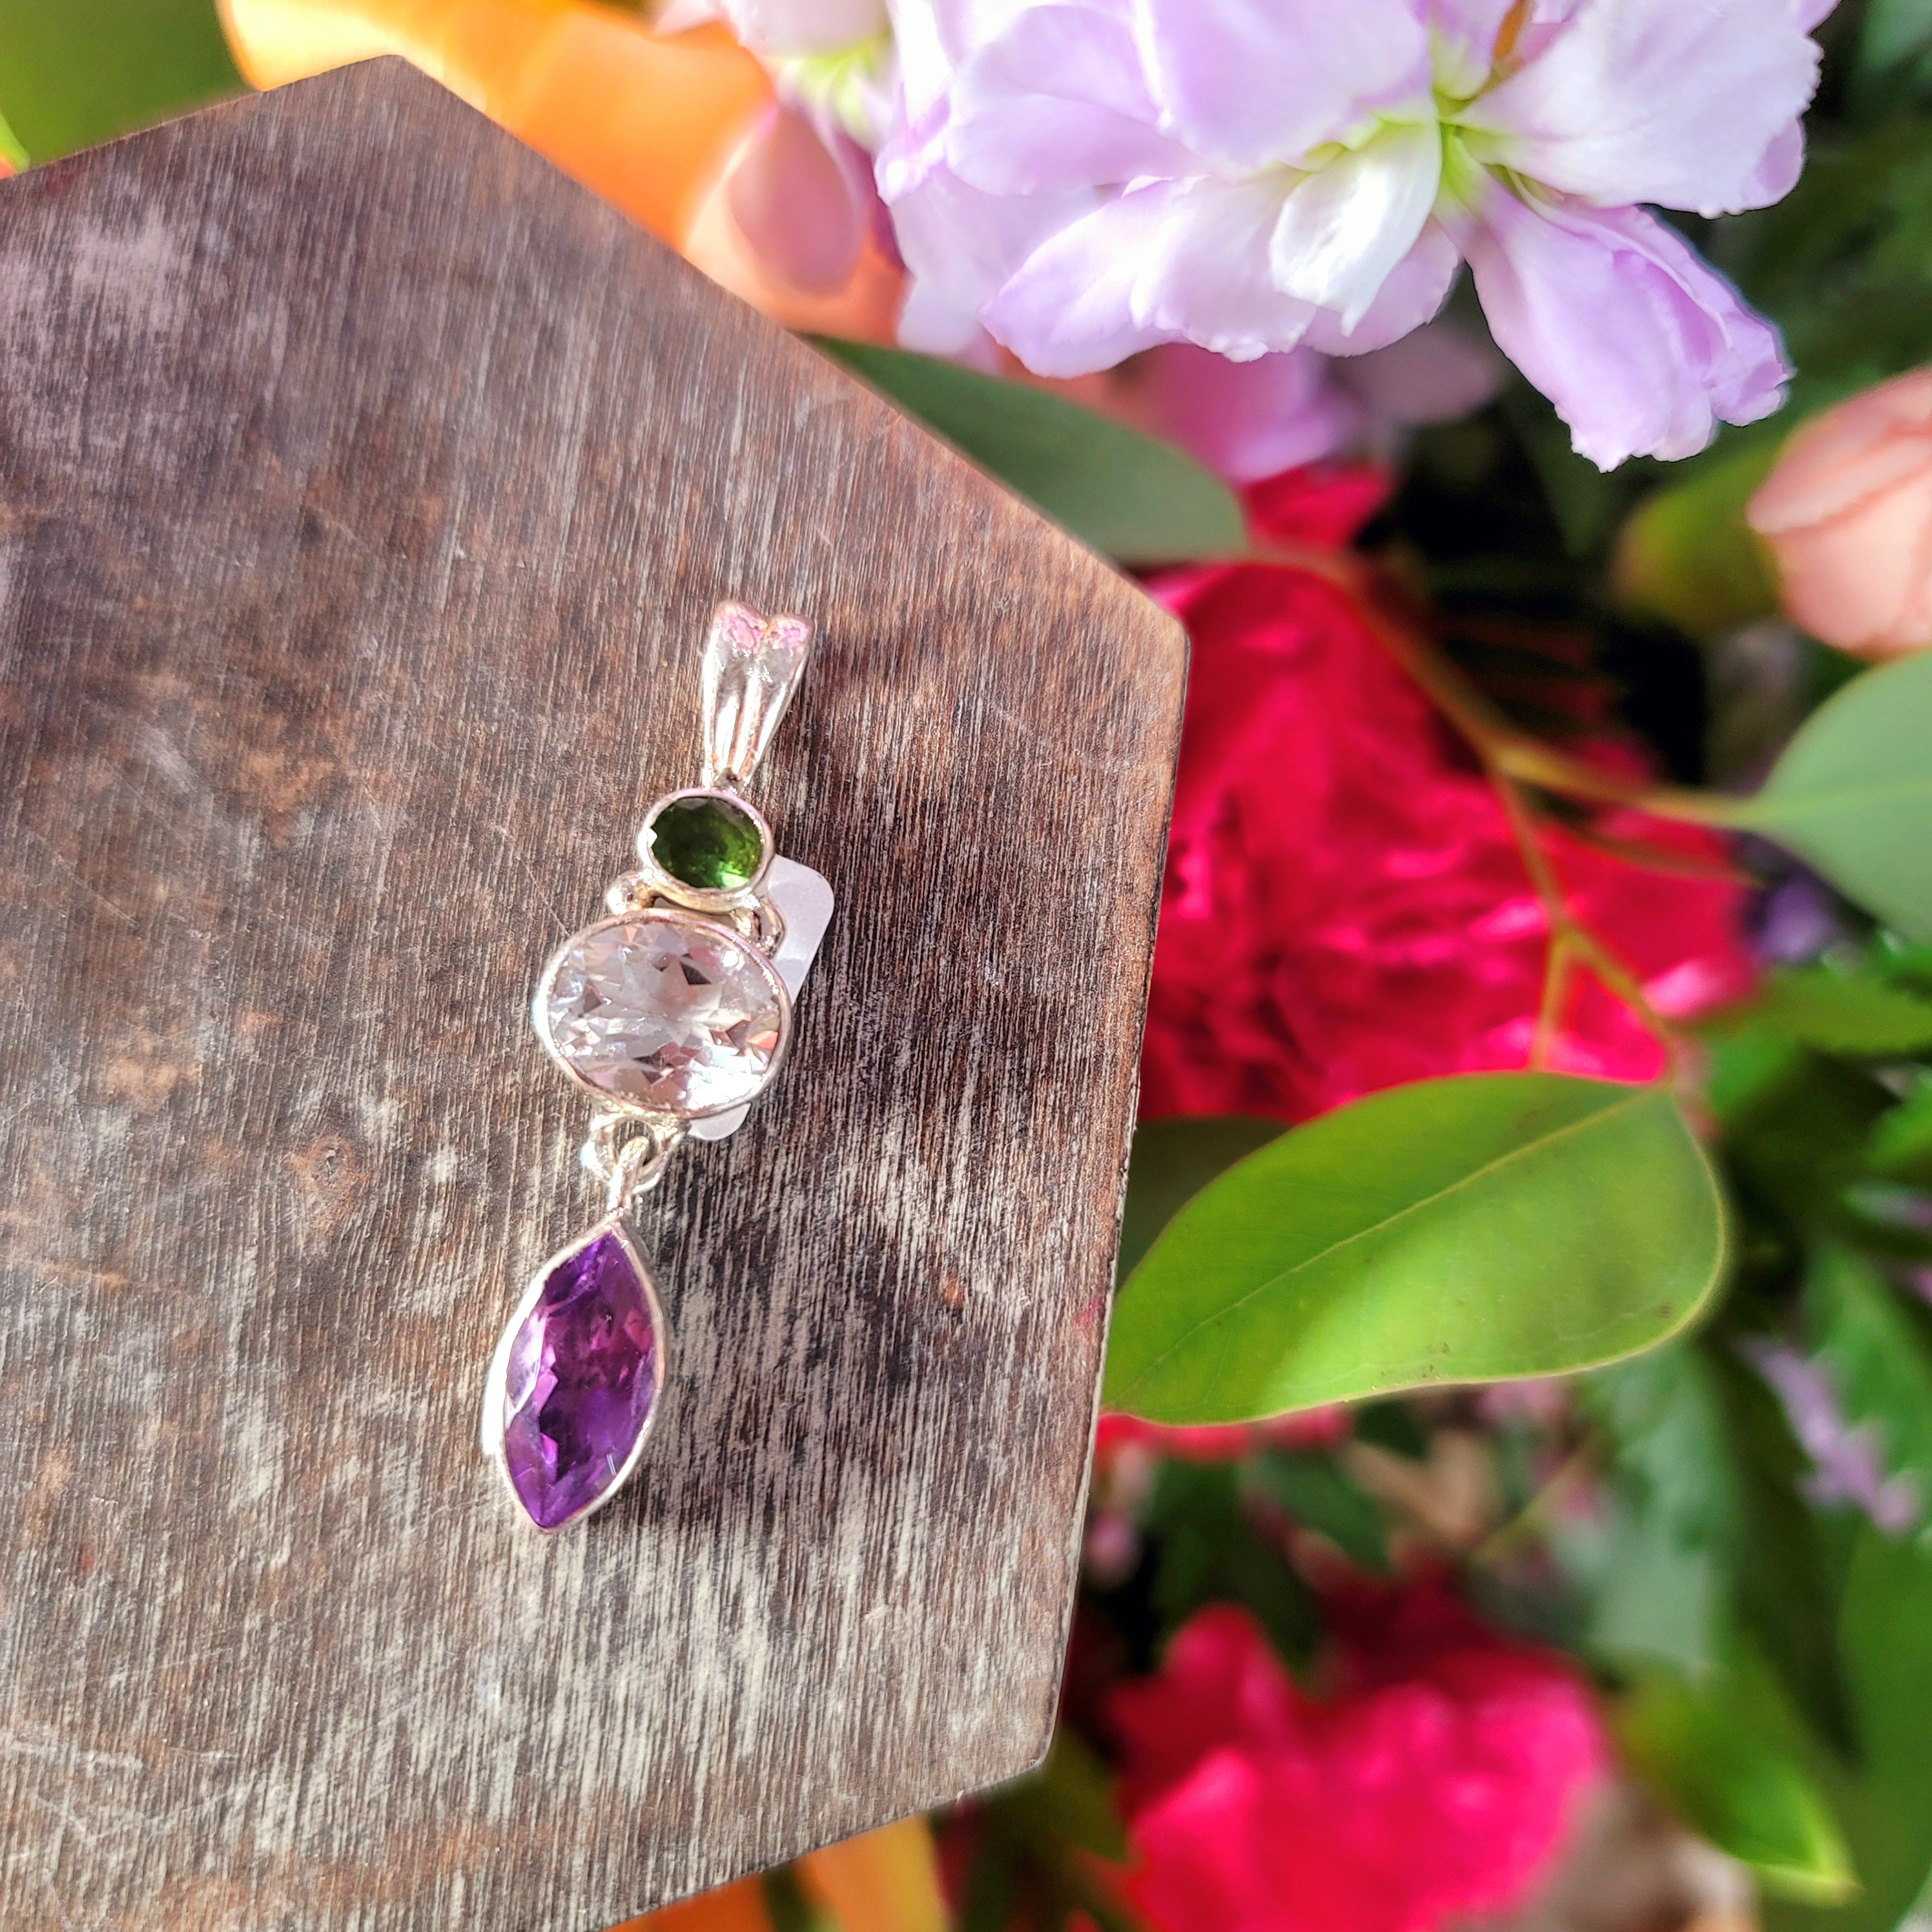 Green Tourmaline x White Topaz x Amethyst Pendant .925 Silver for Intuitively Expressing your Feelings